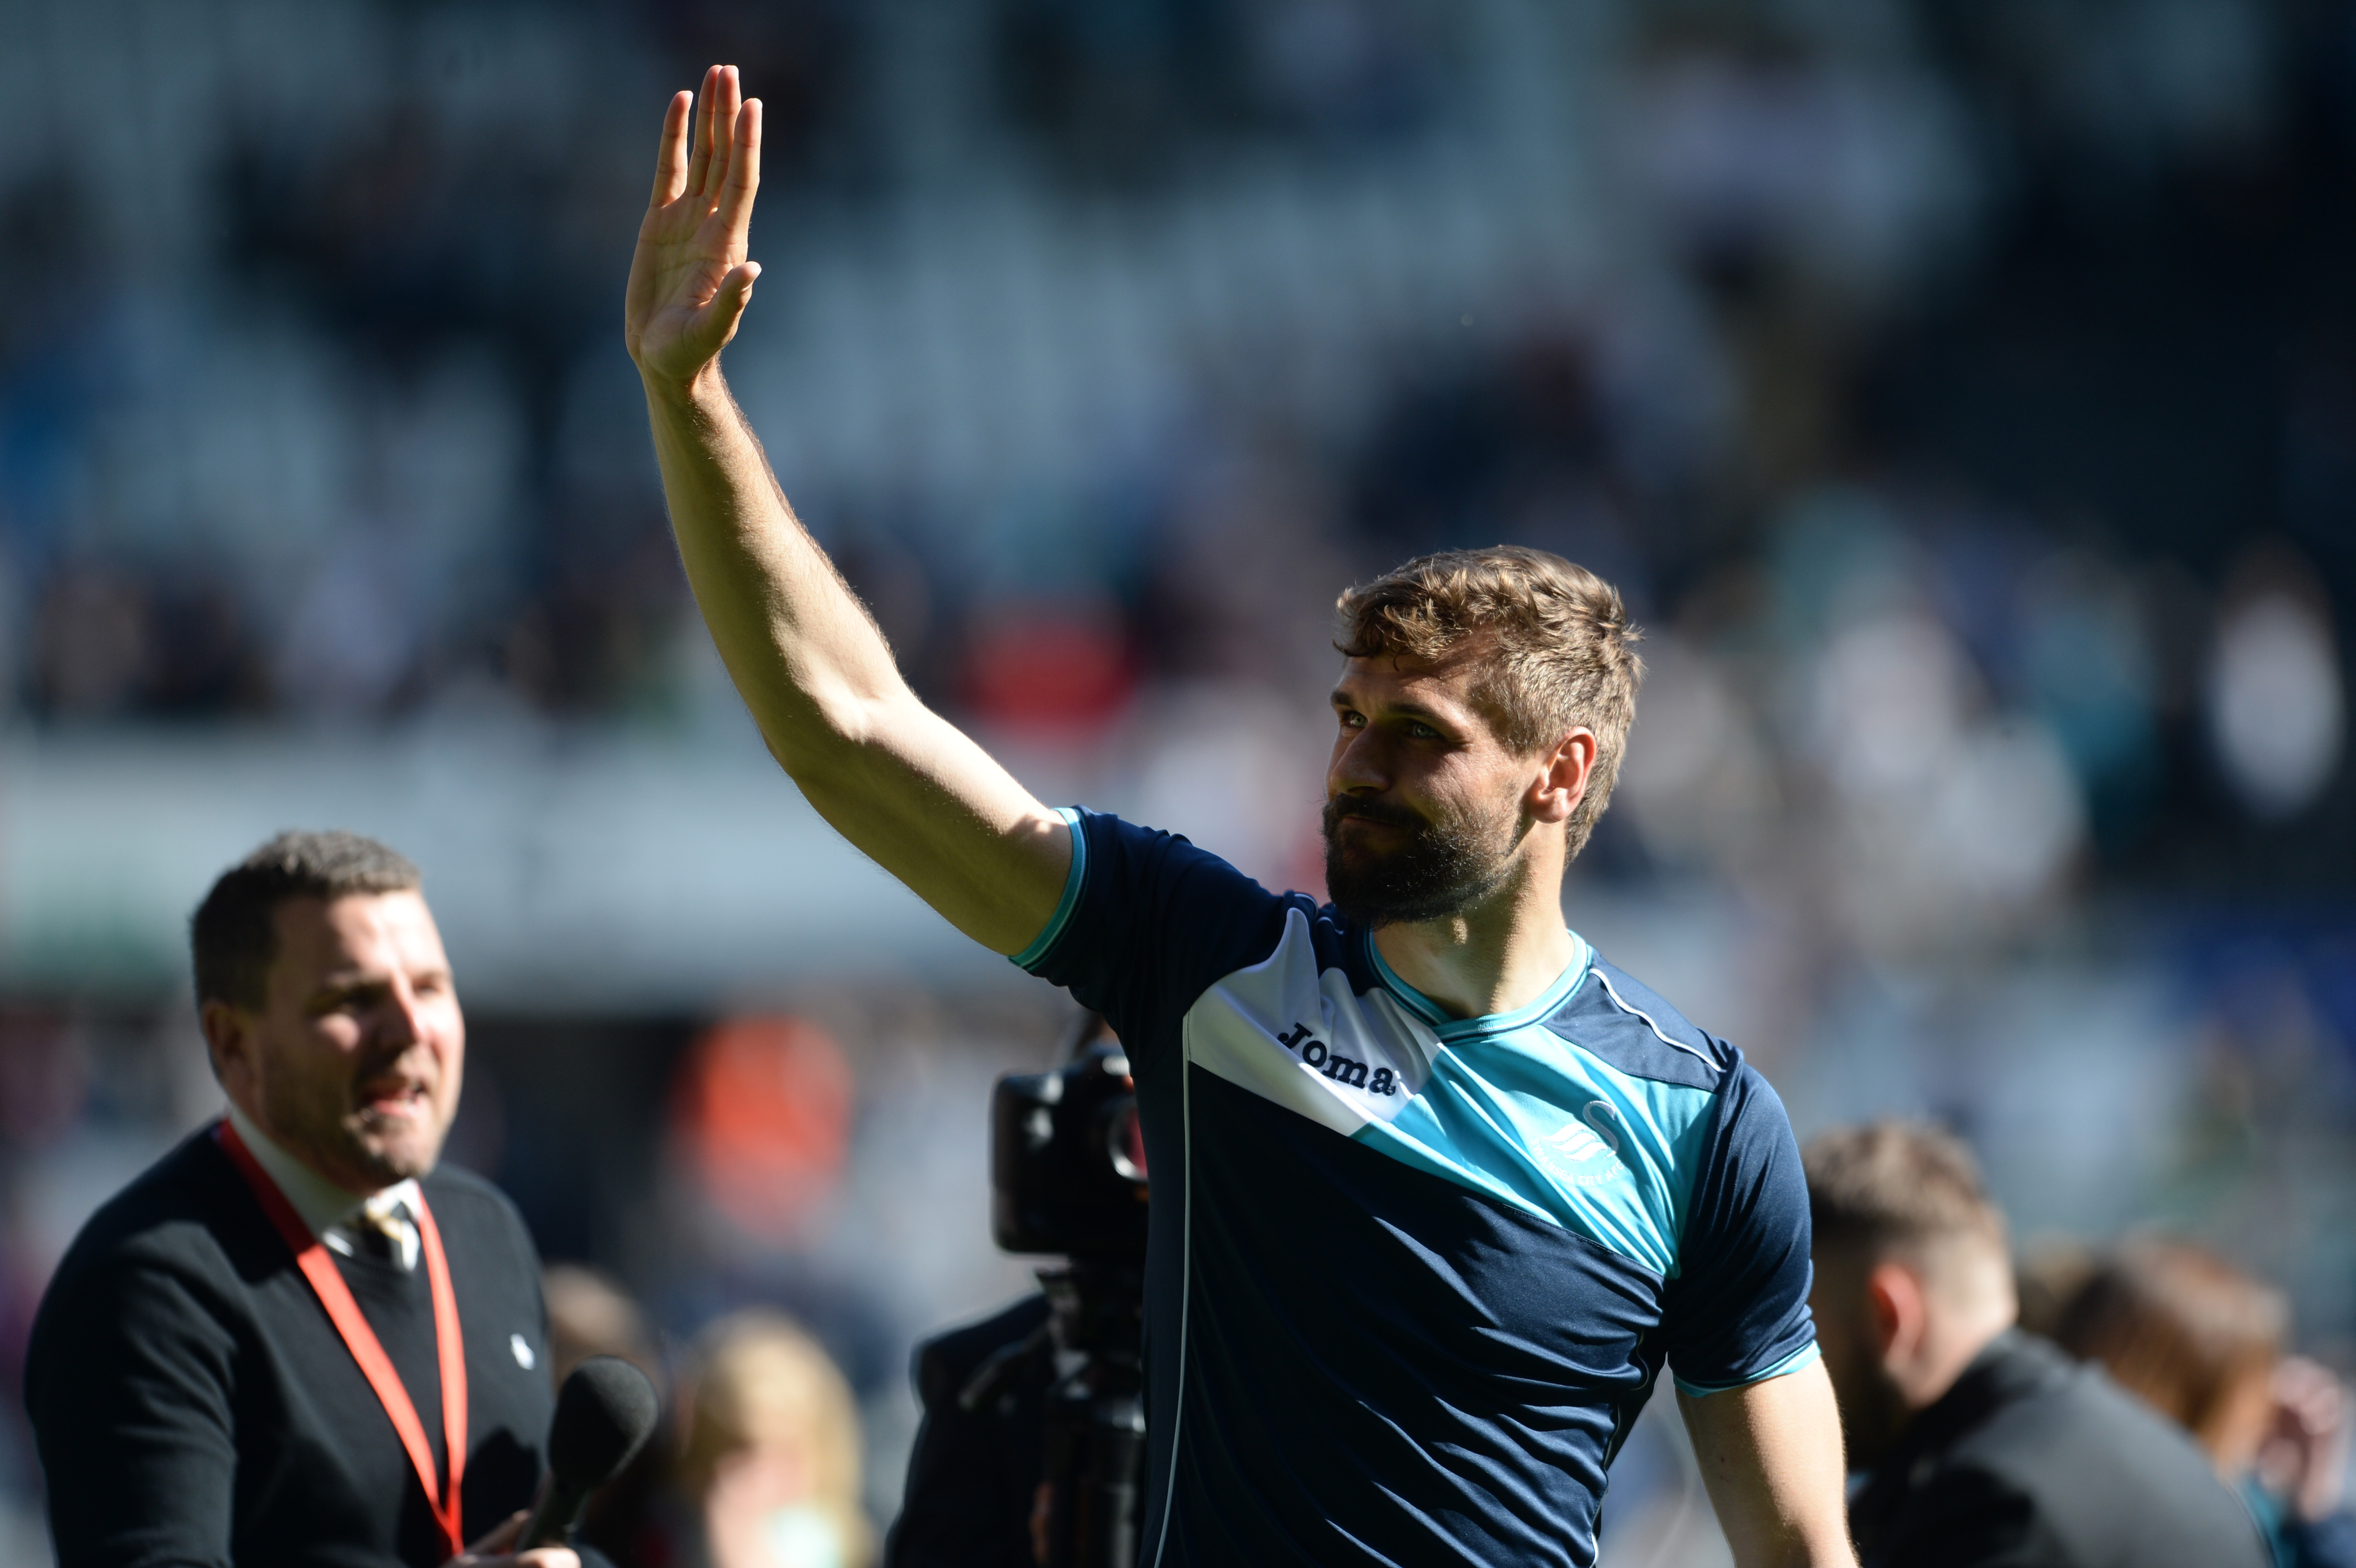 SWANSEA, UNITED KINGDOM - MAY 21: Fernando Llorente of Swansea celebrates at the final whistle during the Premier League match between Swansea City and West Bromwich Albion at the Liberty Stadium on May 21, 2017 in Swansea, Wales. (Photo by Harry Trump/Getty Images)